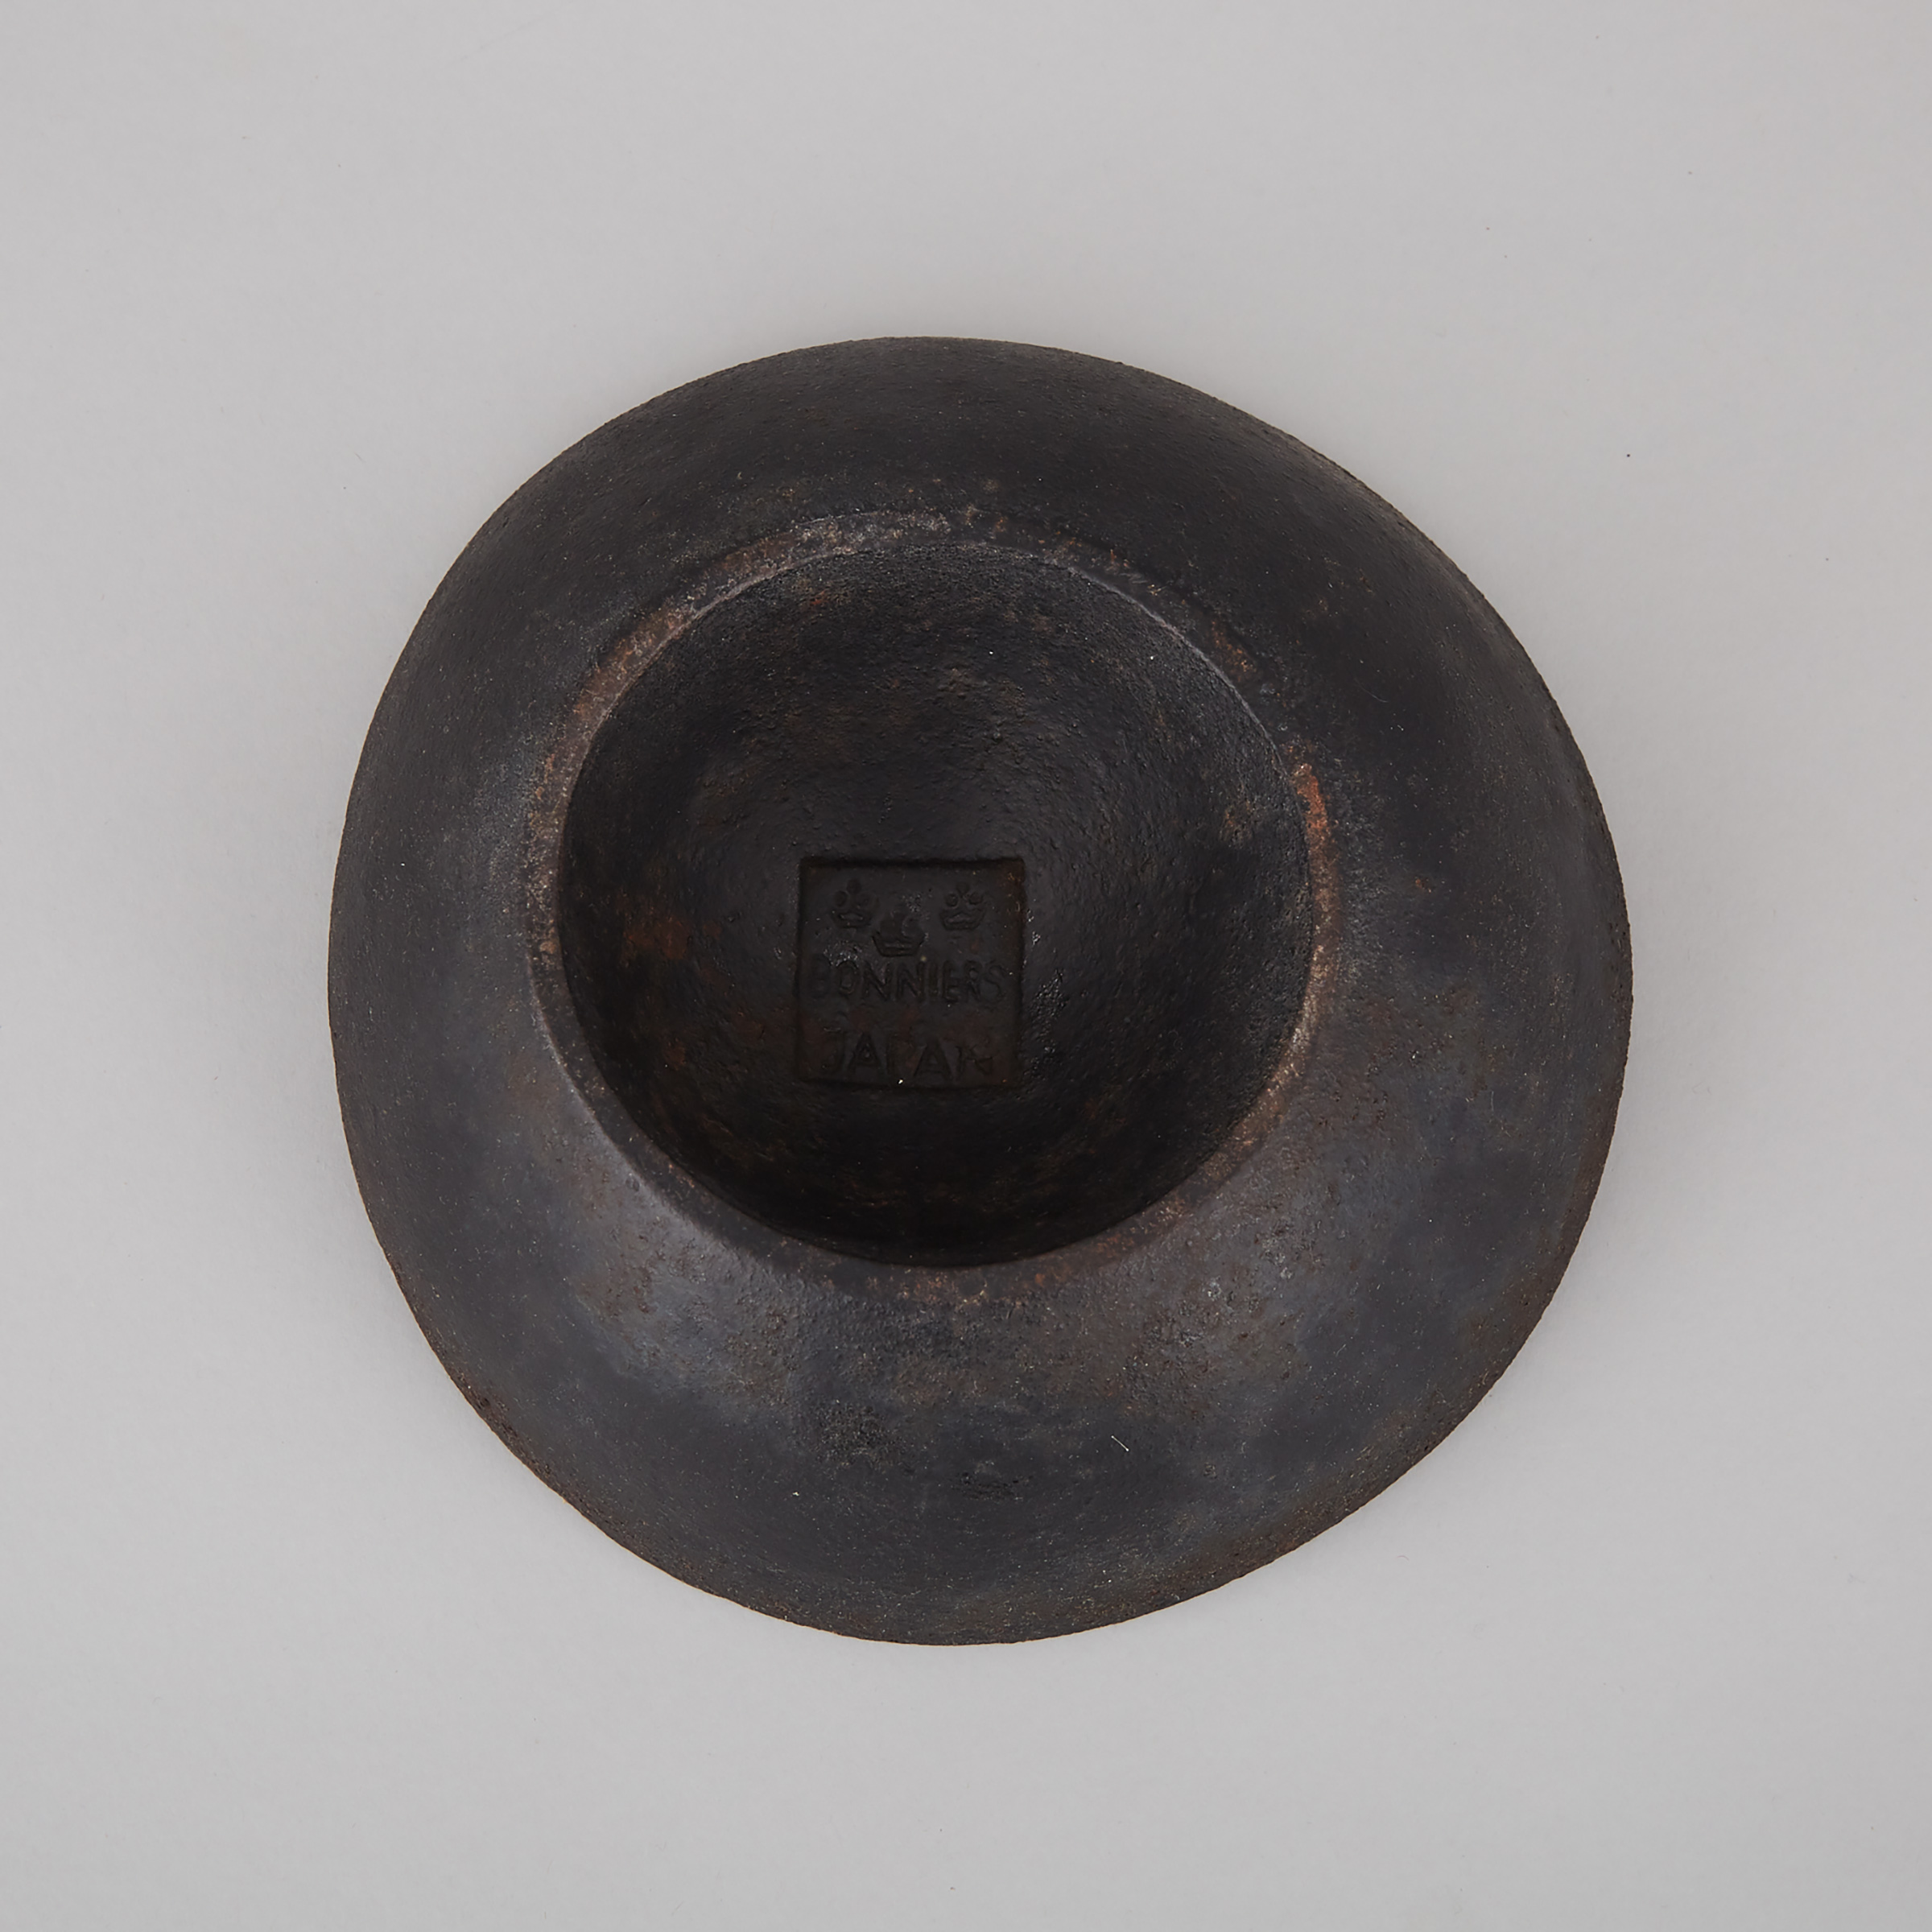 Attributed to Isamu Noguchi (American, 1904-1988) Ashtray for Bonniers, New York, c.1950